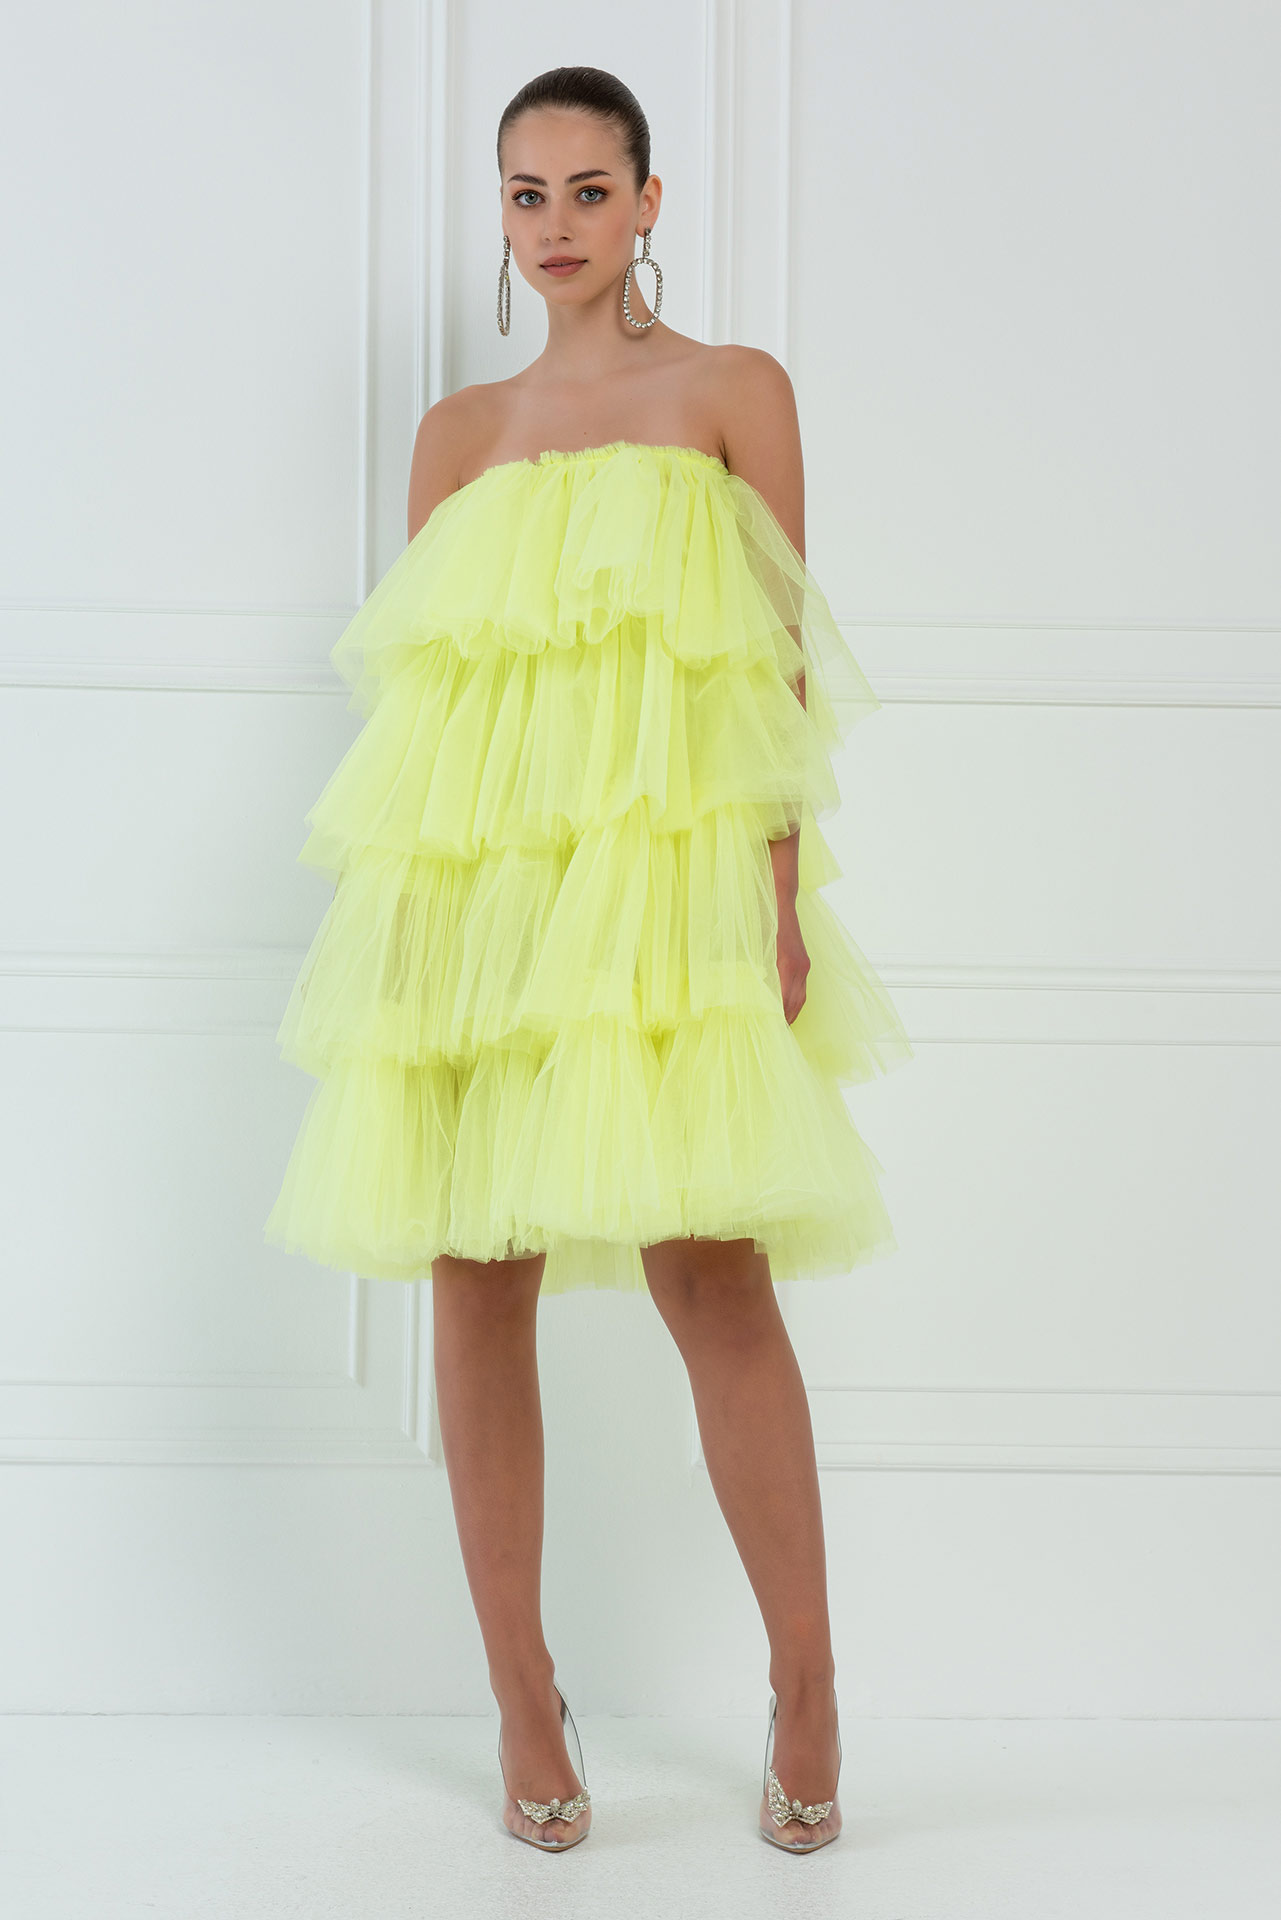 Wholesale Off The Shoulder Neon Yellow Tulle Dress